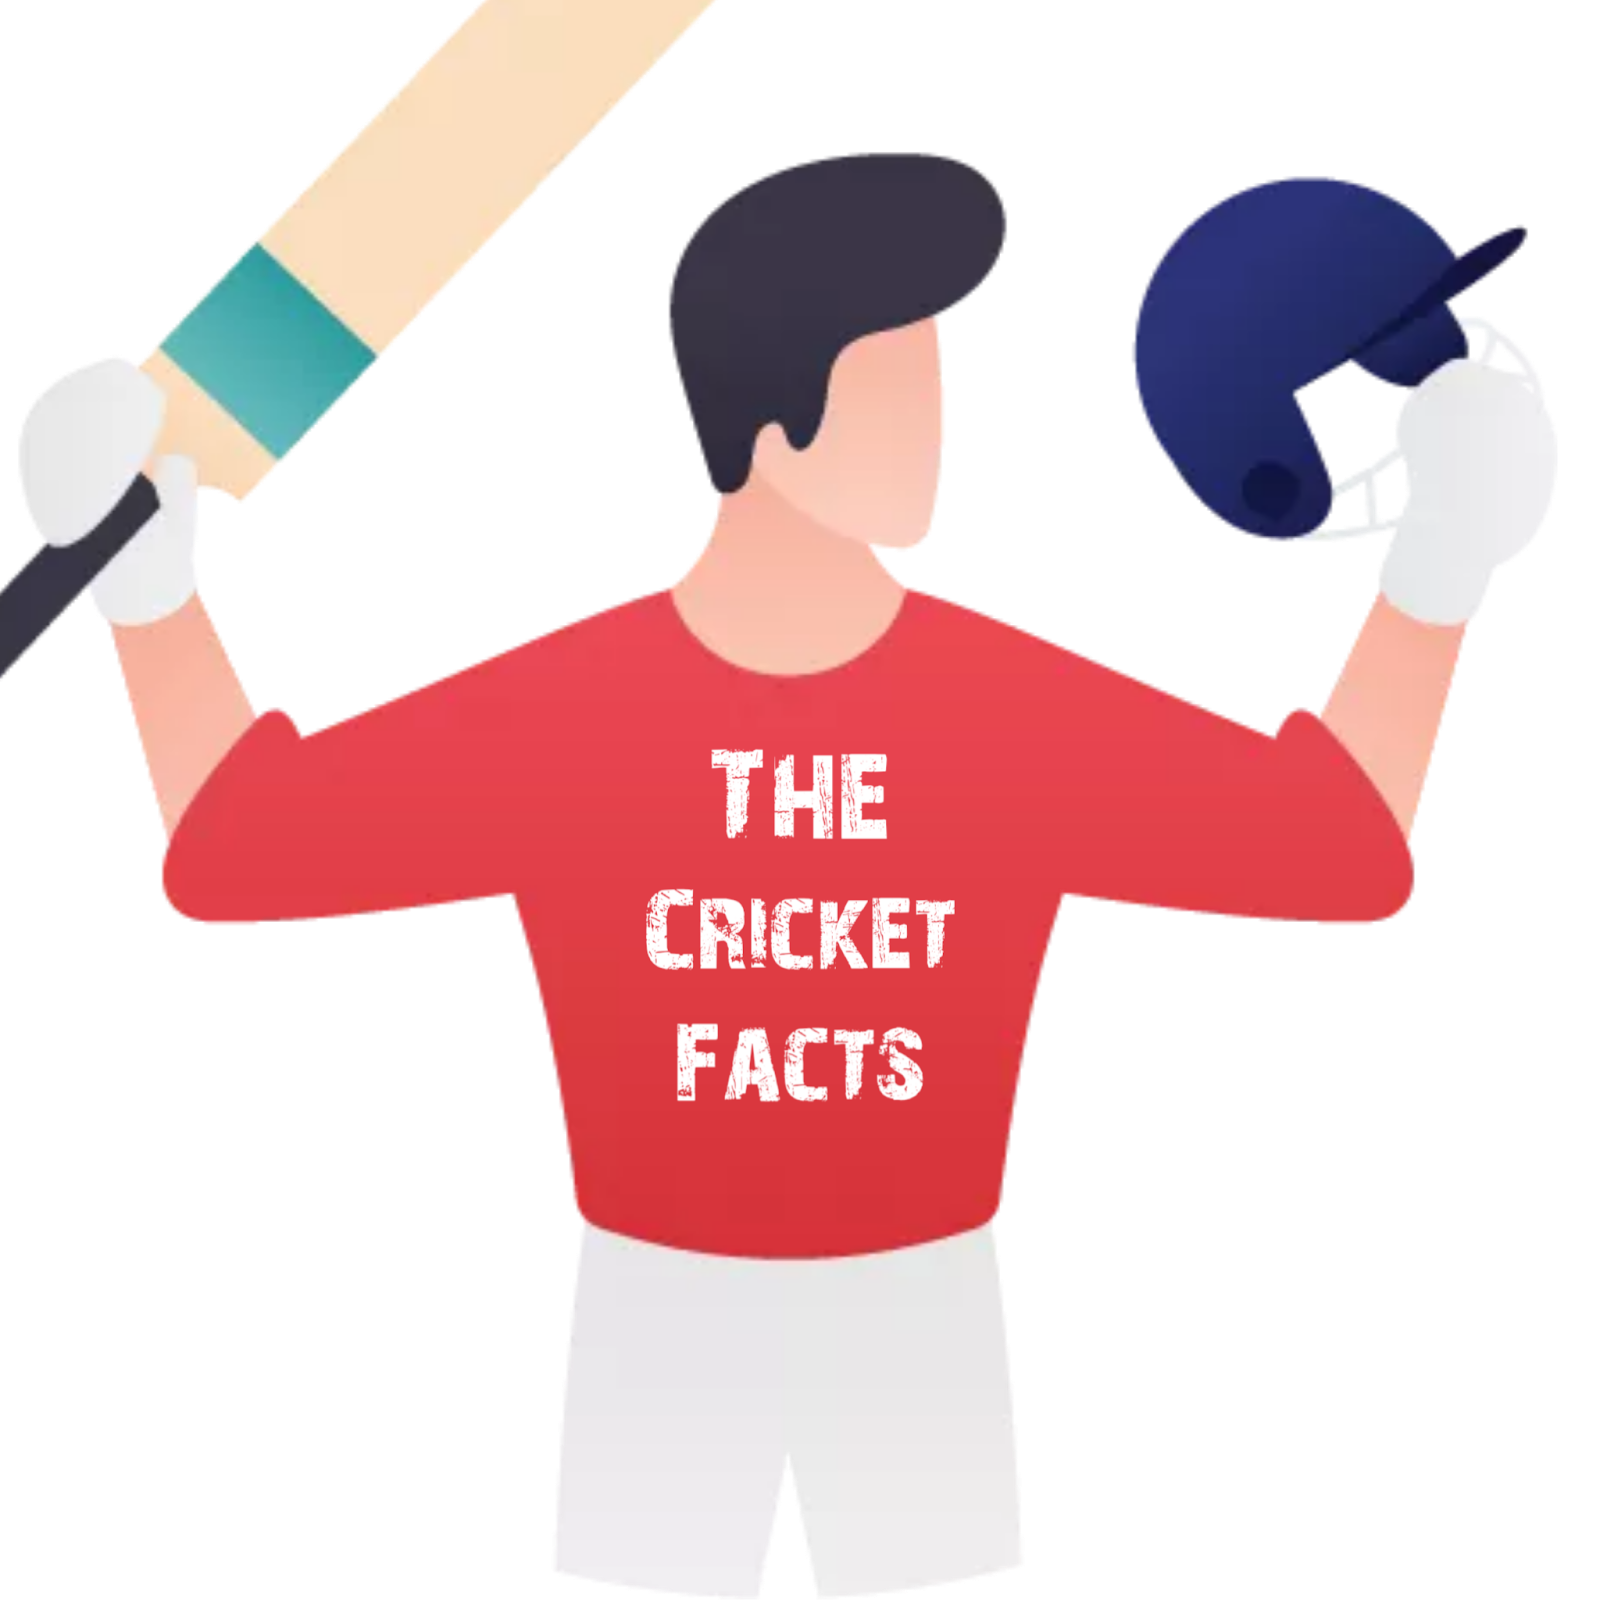 The Cricket Facts